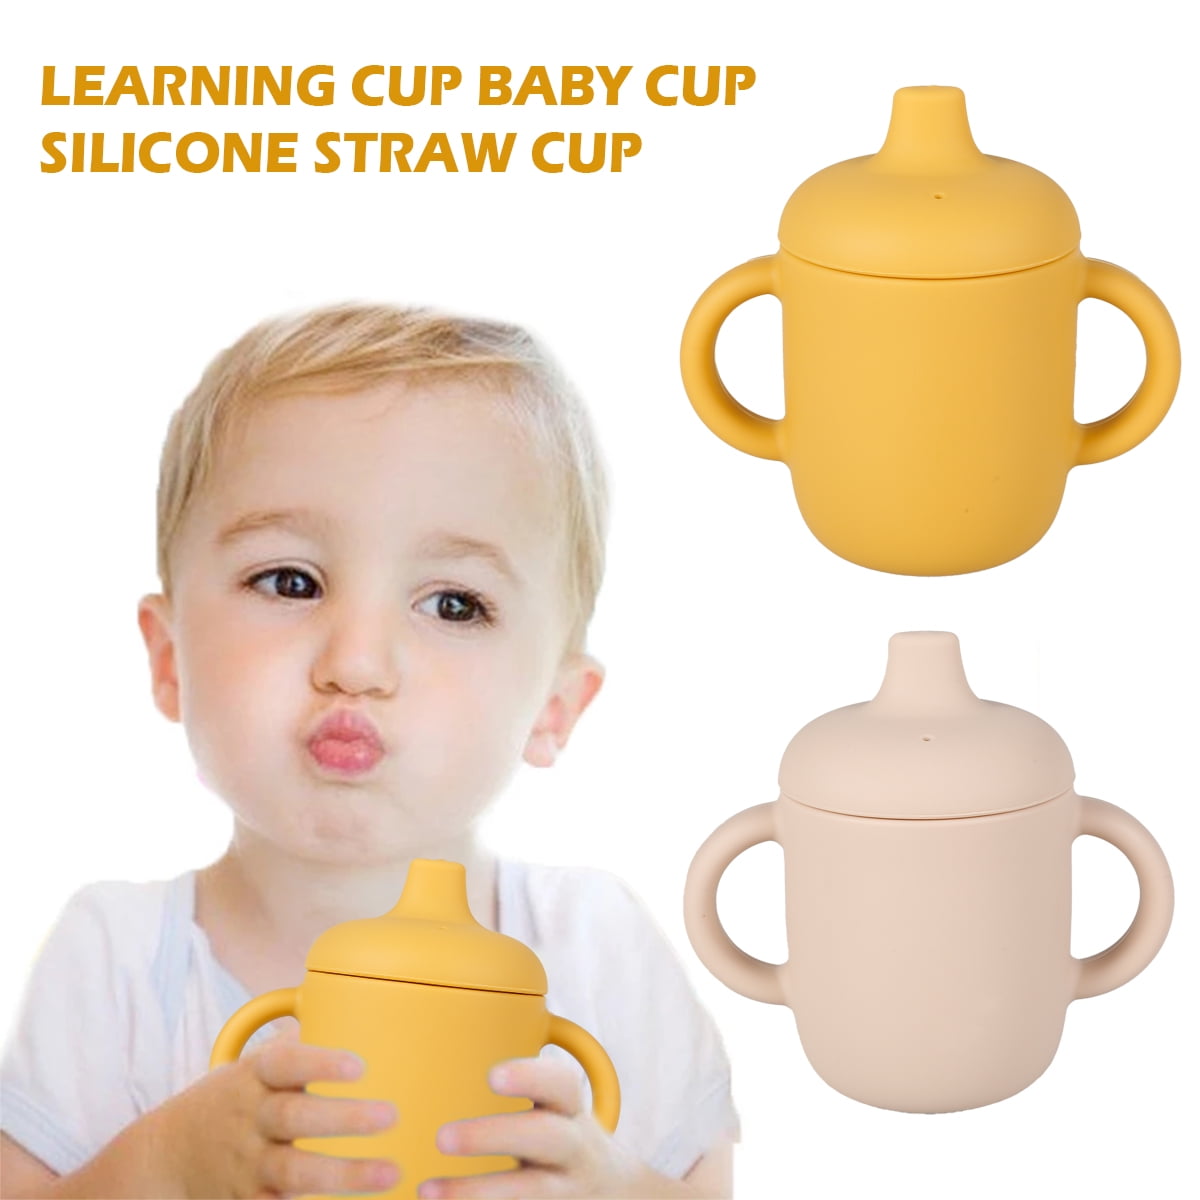 Kangookid 6.5 oz Silicone Baby Cup with Straw | Toddler Smoothie Cup Spill Proof | Baby Training Cup for 6+ Mo to 12-18 Months | Silicone Sippy Cup